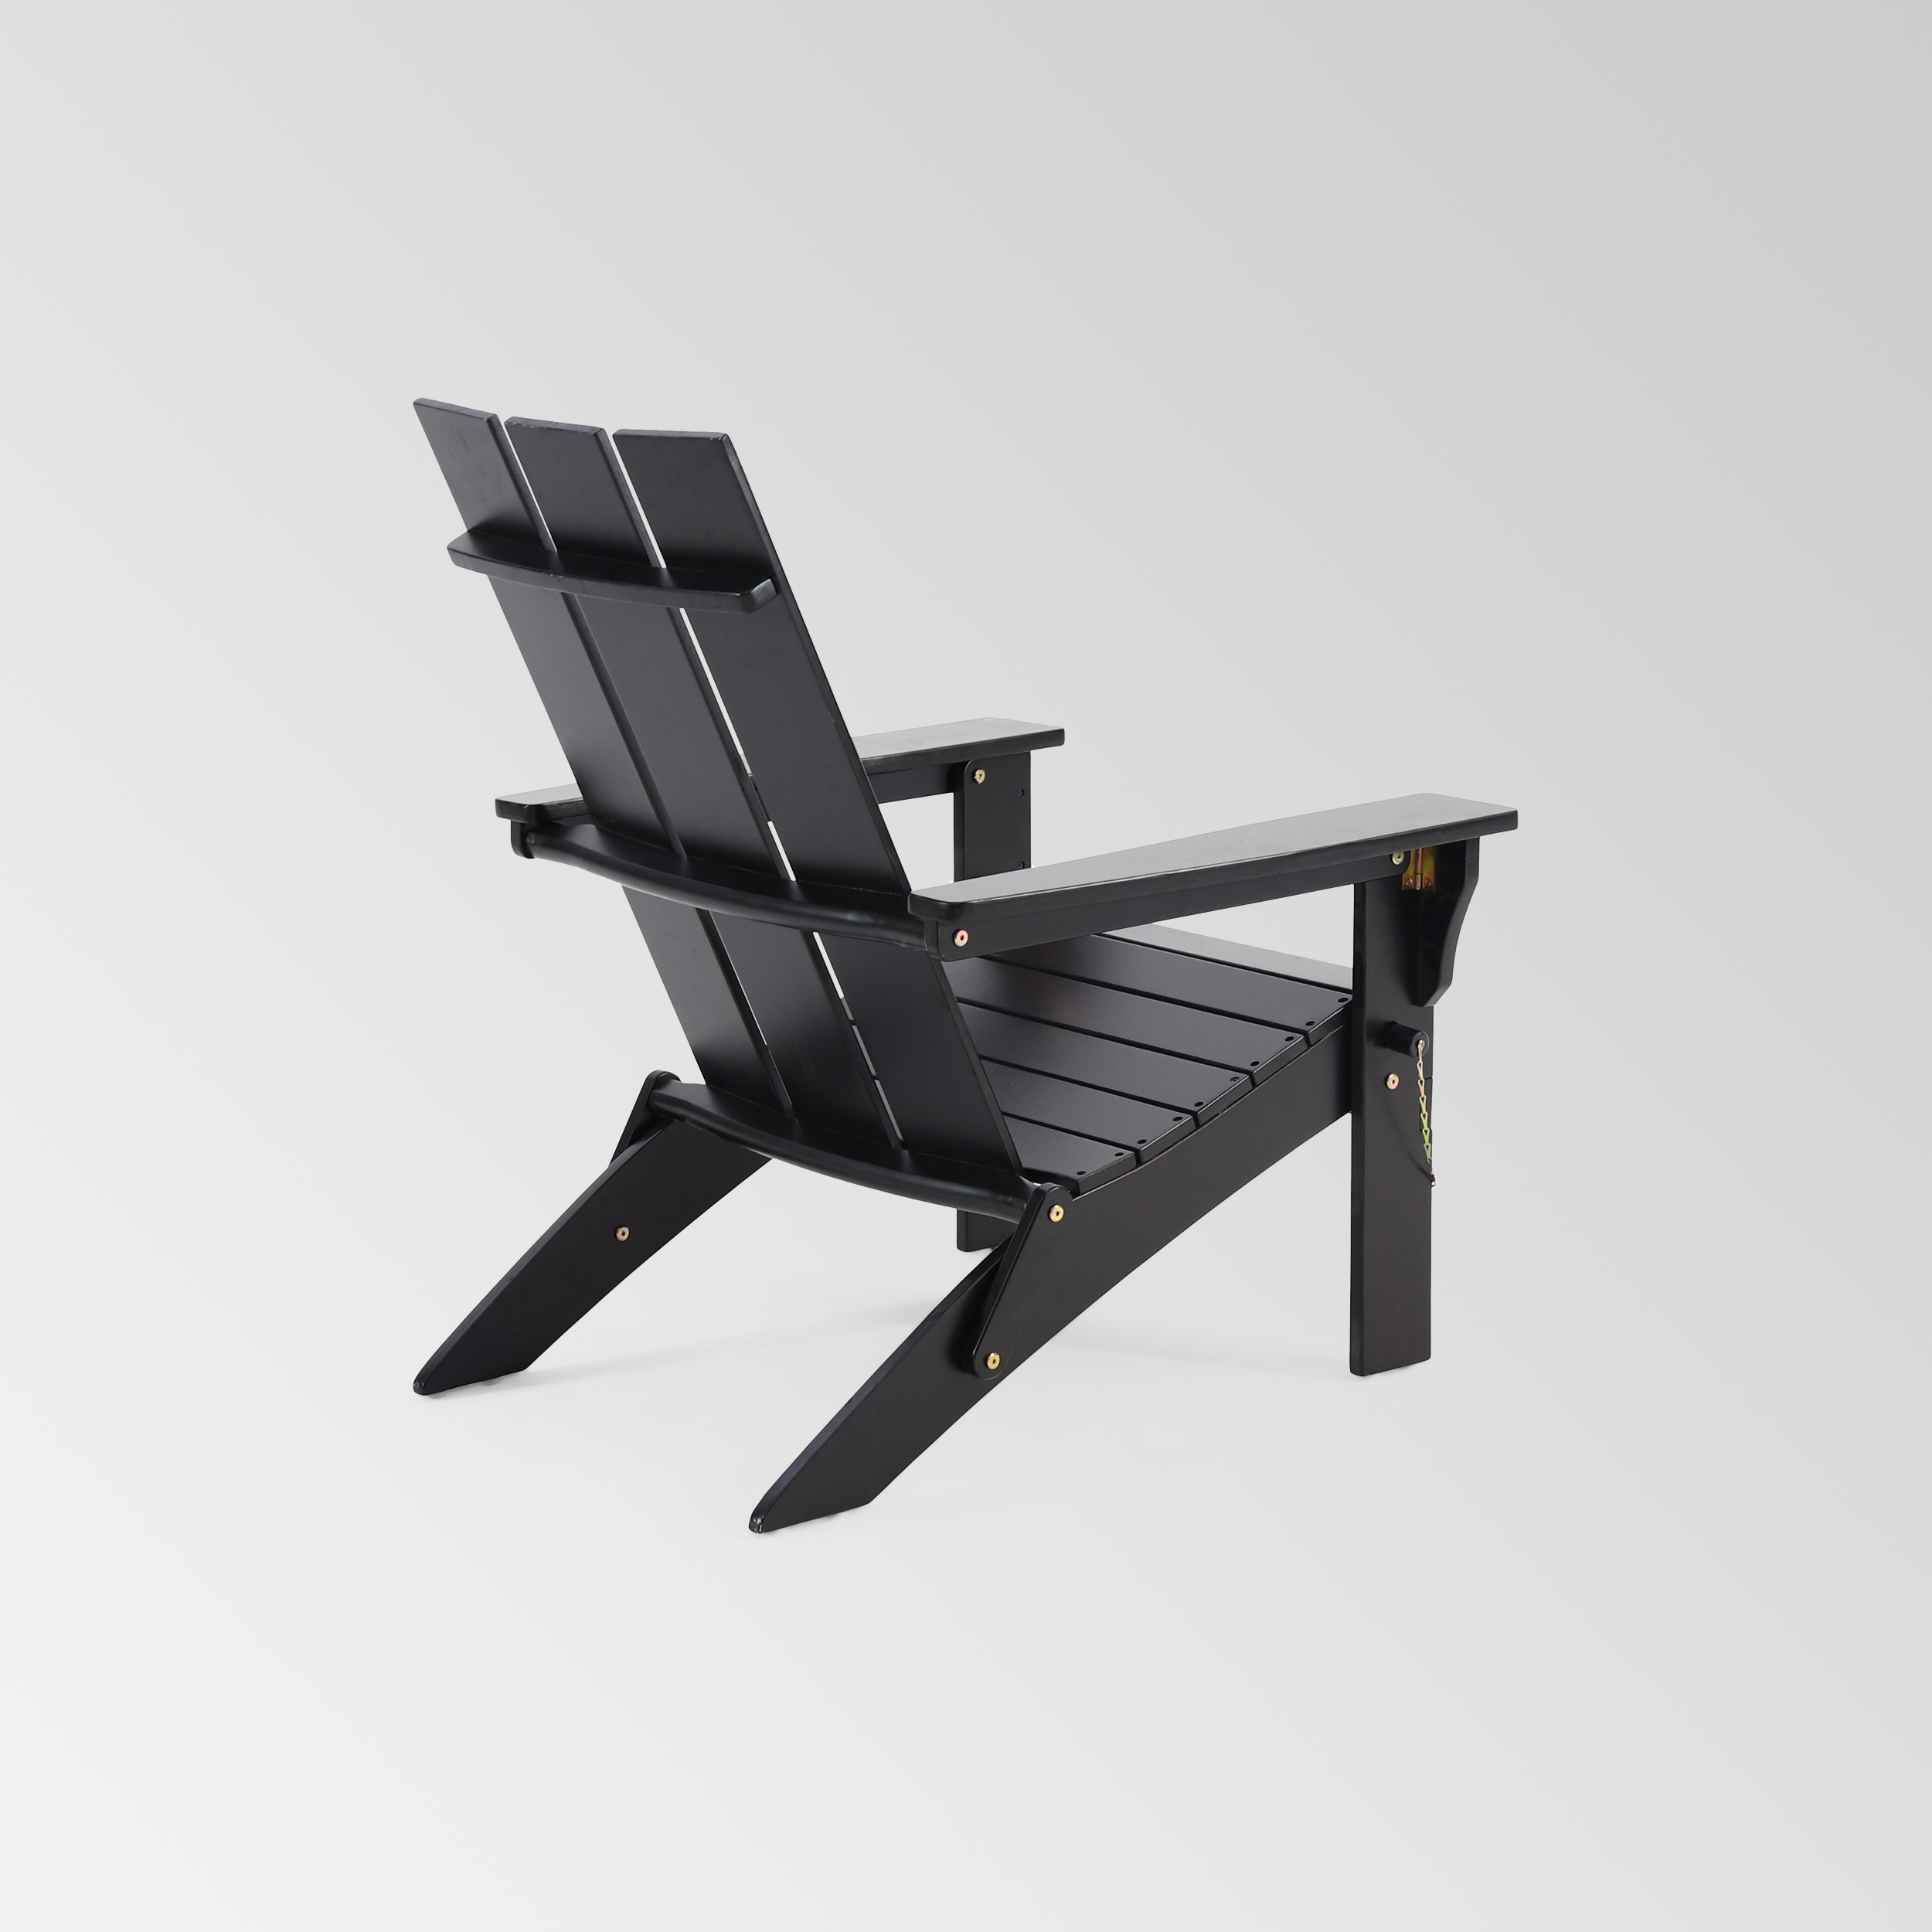 KUIKUI Outdoor Classic Pure Black Solid Wood Adirondack Chair Garden Lounge Chair Foldable - image 3 of 7